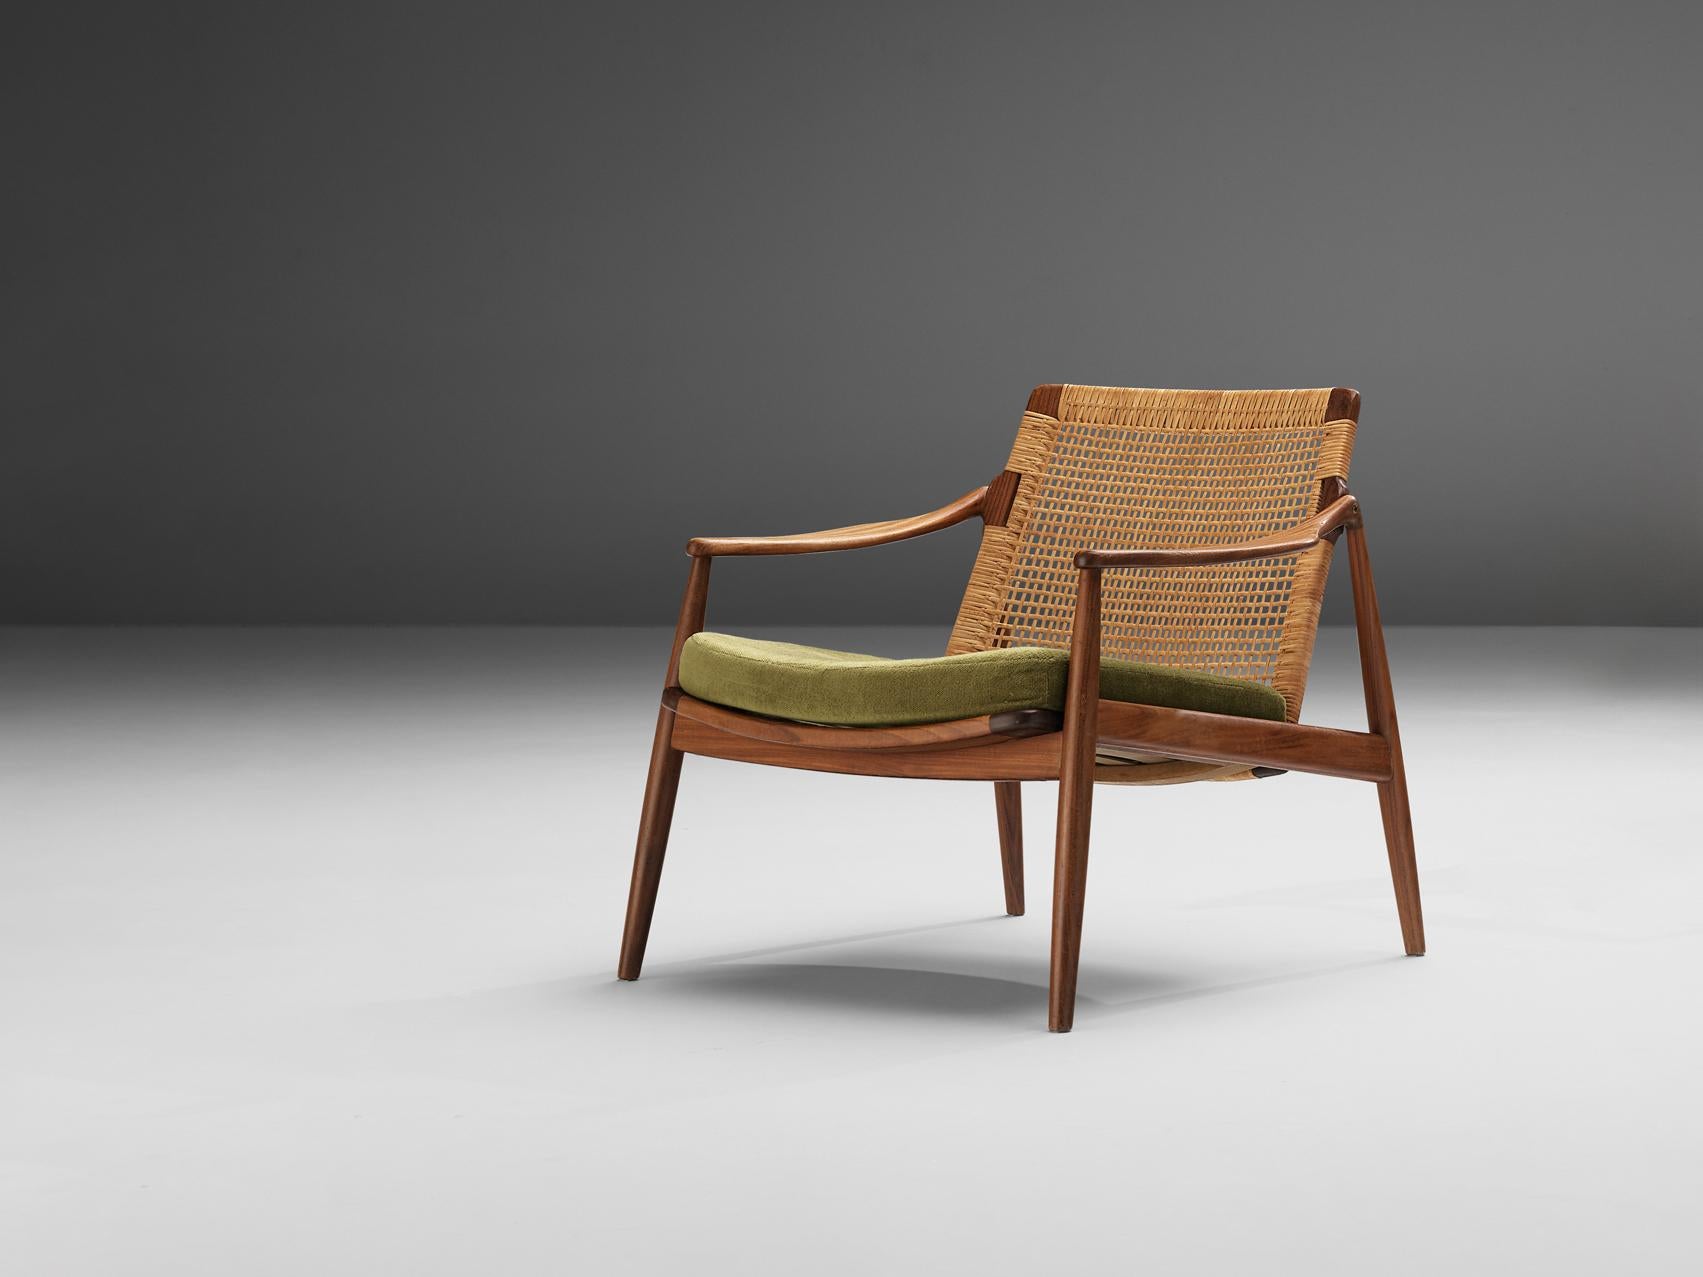 Hartmut Lohmeyer for Wilkhahn, lounge chair, teak, cane, green upholstery, Germany, 1960

The lounge chair by Hartmut Lohmeyer is organically shaped. The wide open teak frame features a slightly tilted back made out of cane. The softly bent armrests